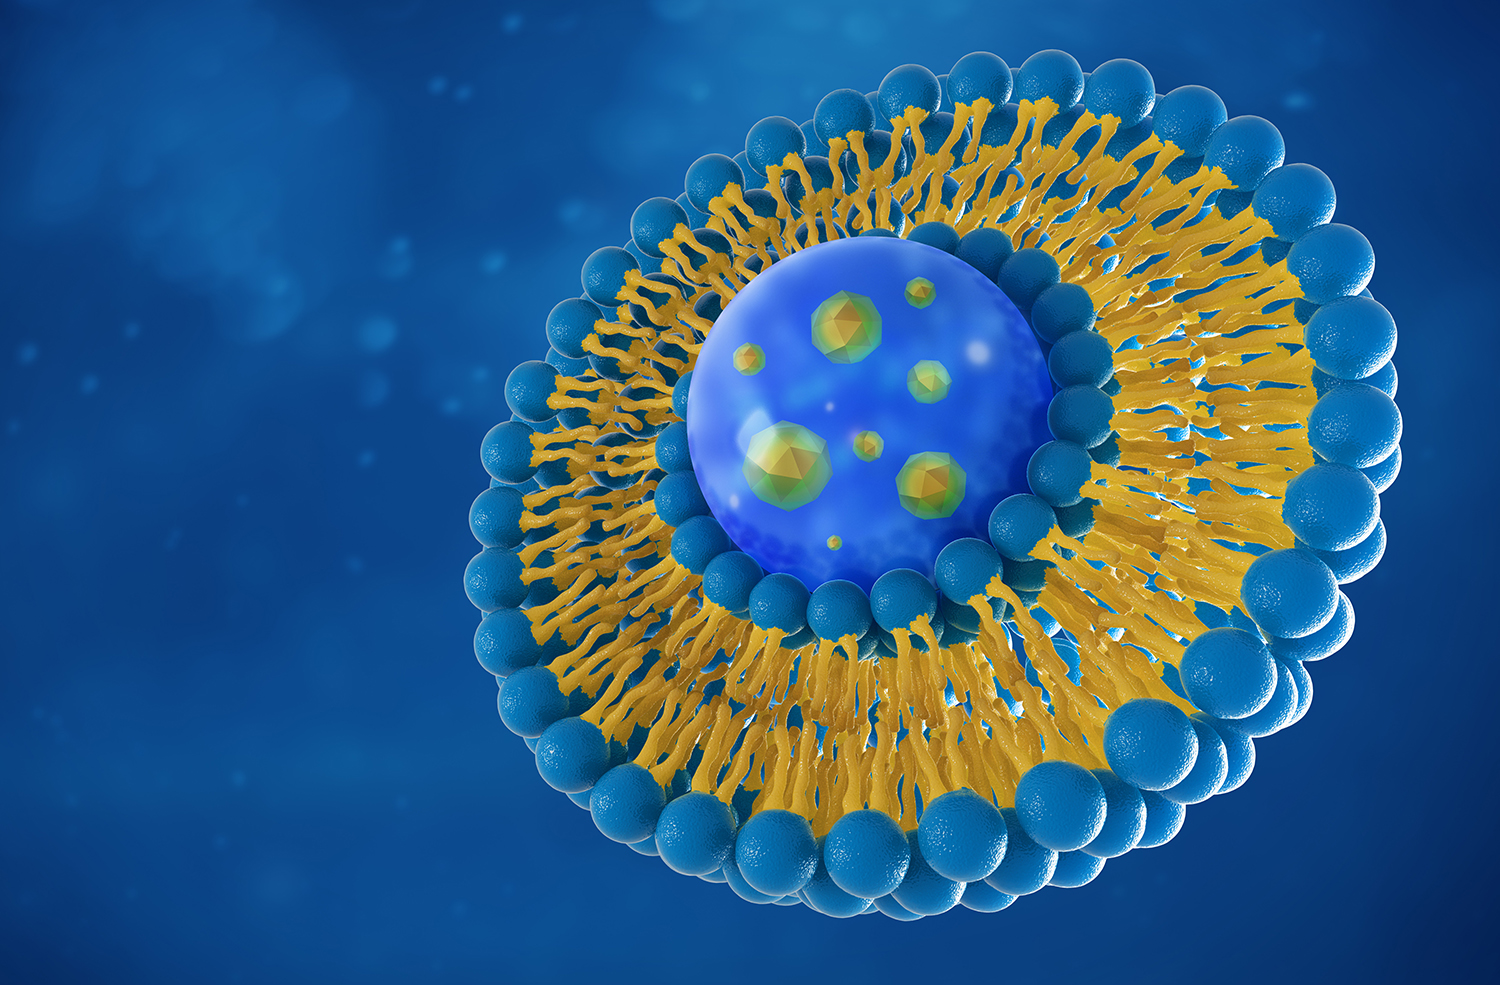 WP2608: Lipid Nanoparticle and Liposome Characterization with FFF-MALS-DLS